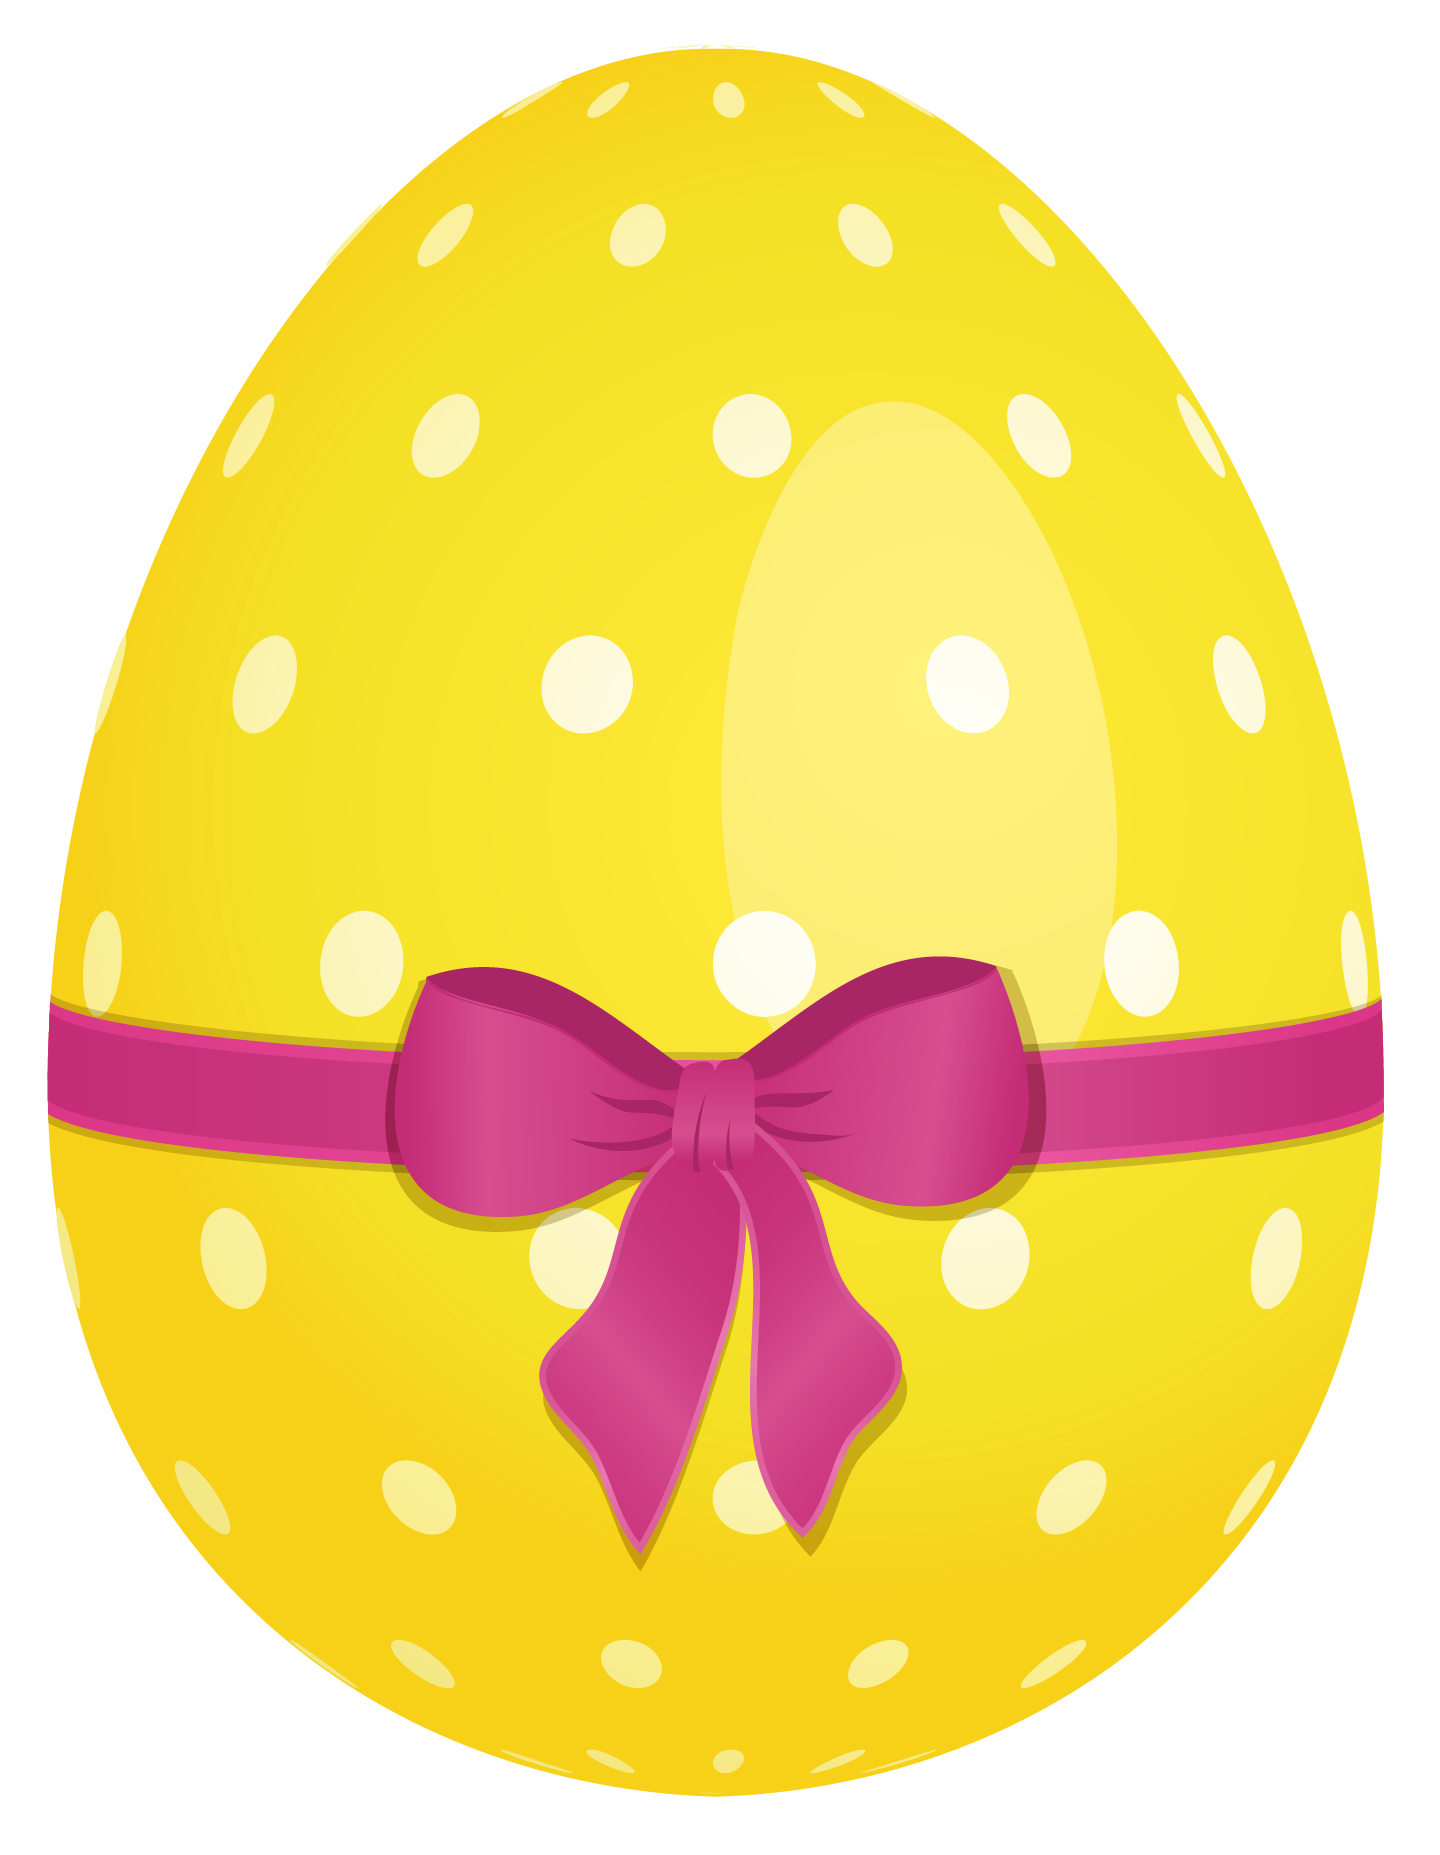 Yellow Dotted Easter Egg with Pink Bow PNG Clipart